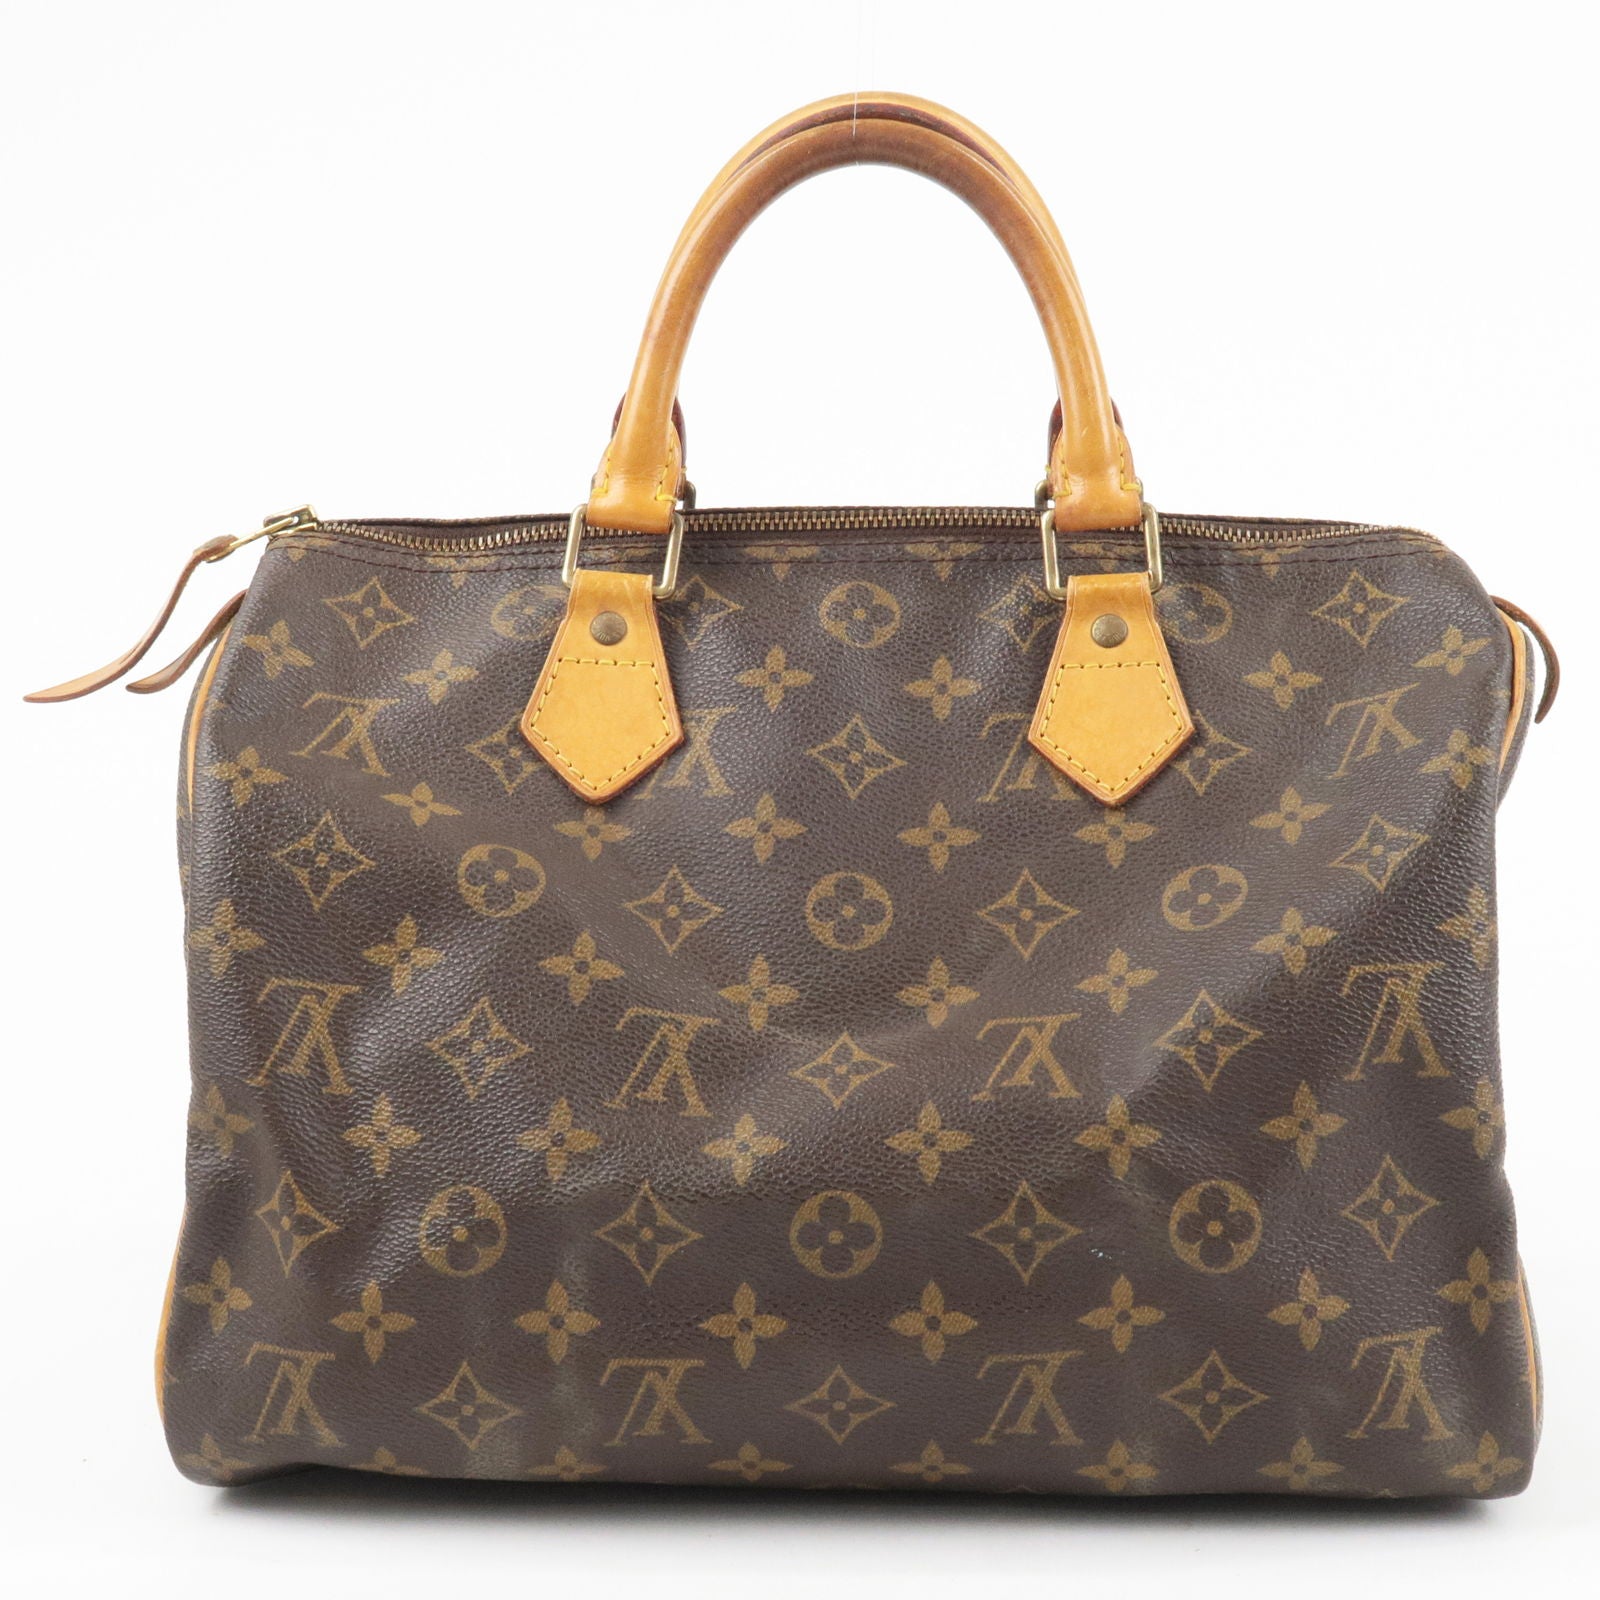 Louis Vuitton Stephen Sprouse Roses Speedy 30 Satchel - A World Of